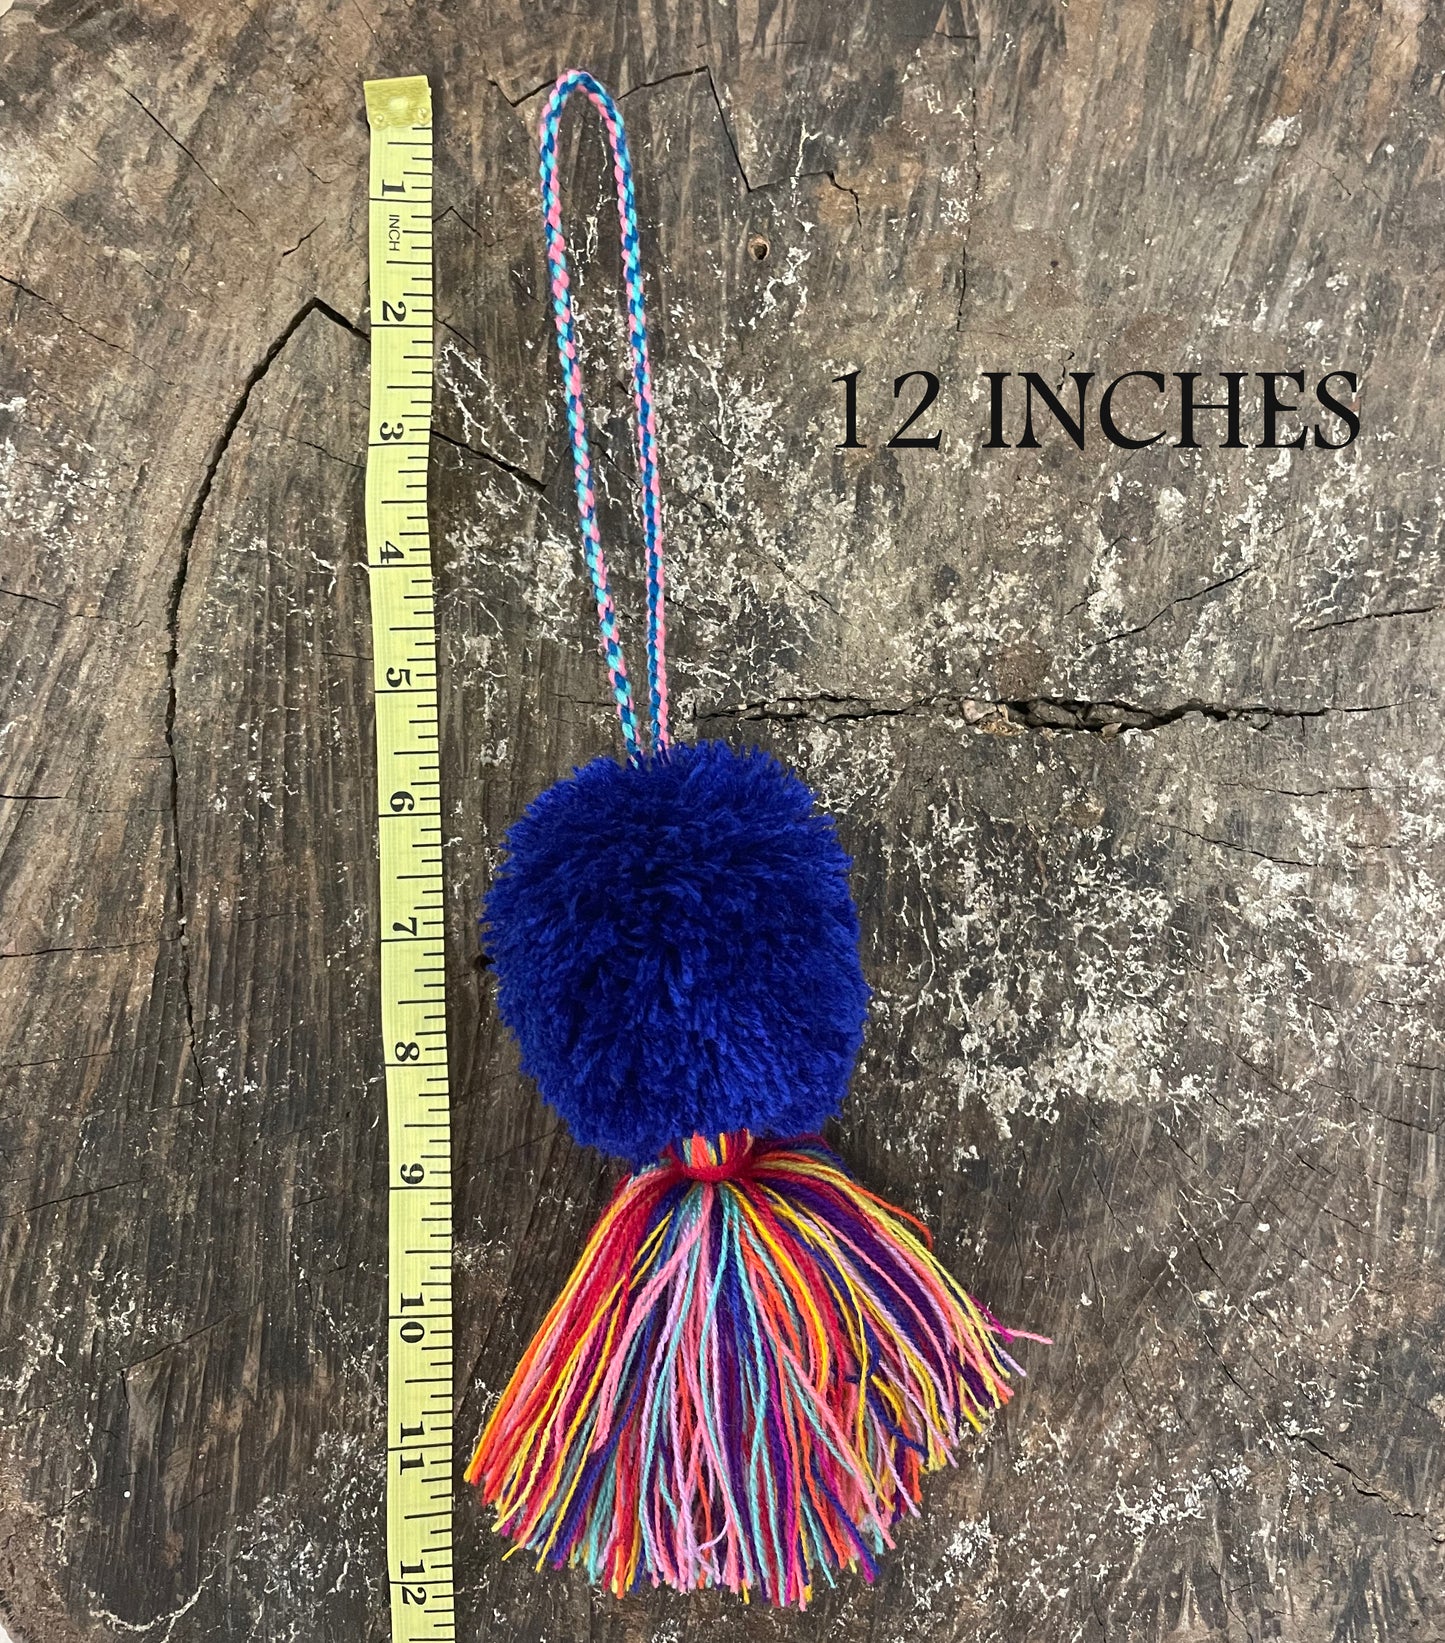 Guatemalan Pom-poms with colorful tassels/Charms